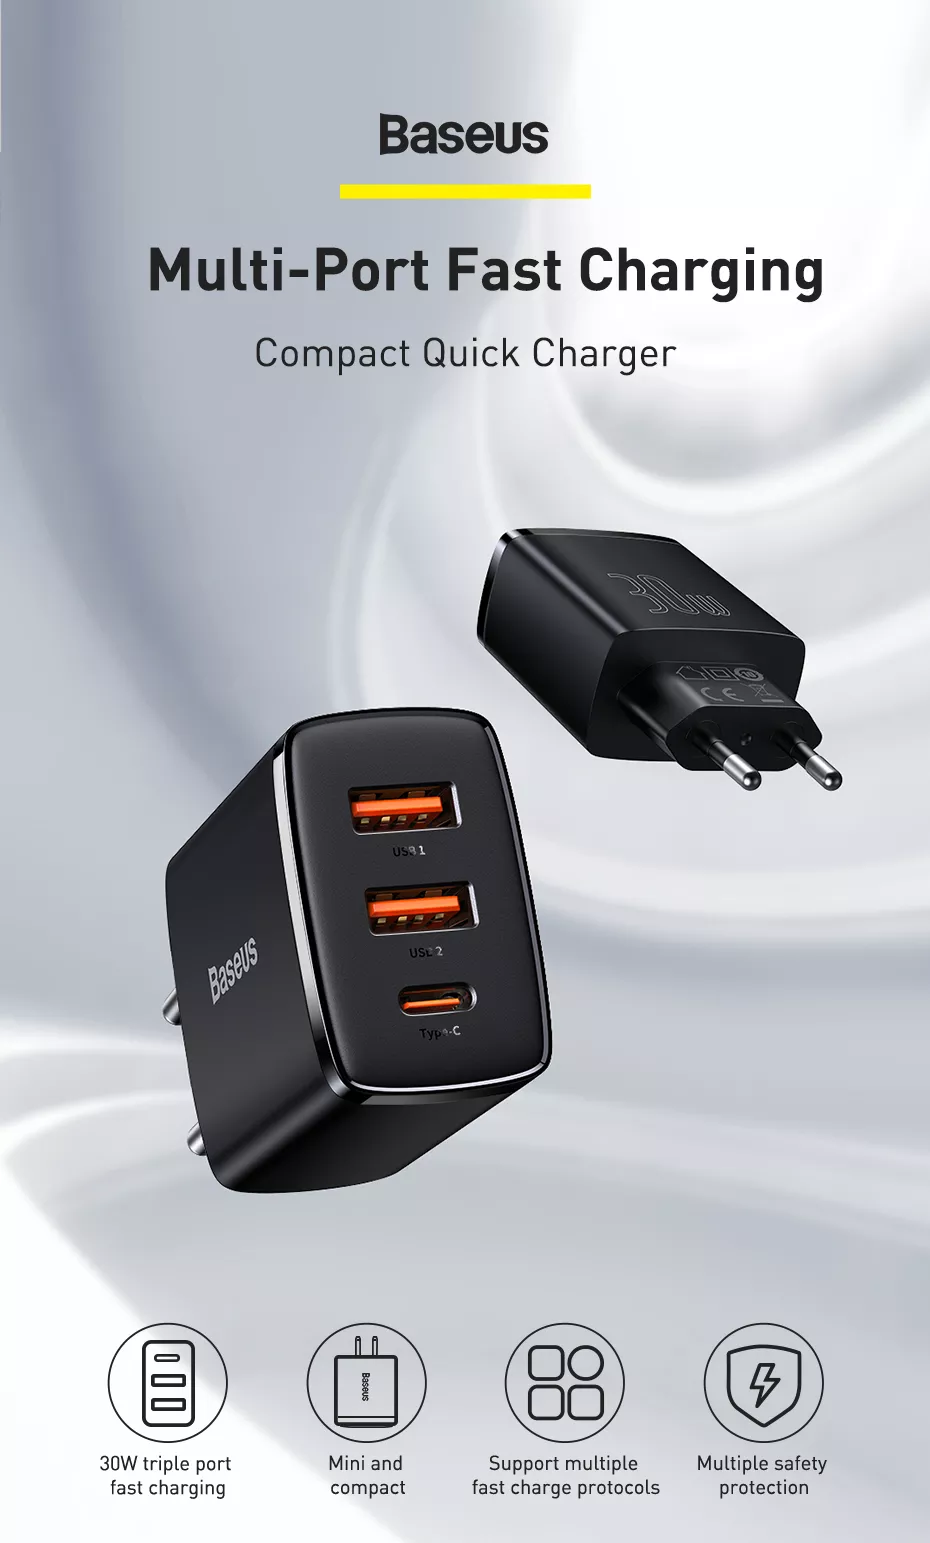 Cu Sac Nhanh Sieu Nho Gon Baseus Compact Quick Charger 30wusb Dual Port Type C30w Pd Qc3 0 Multi Quick Charge Support (10)